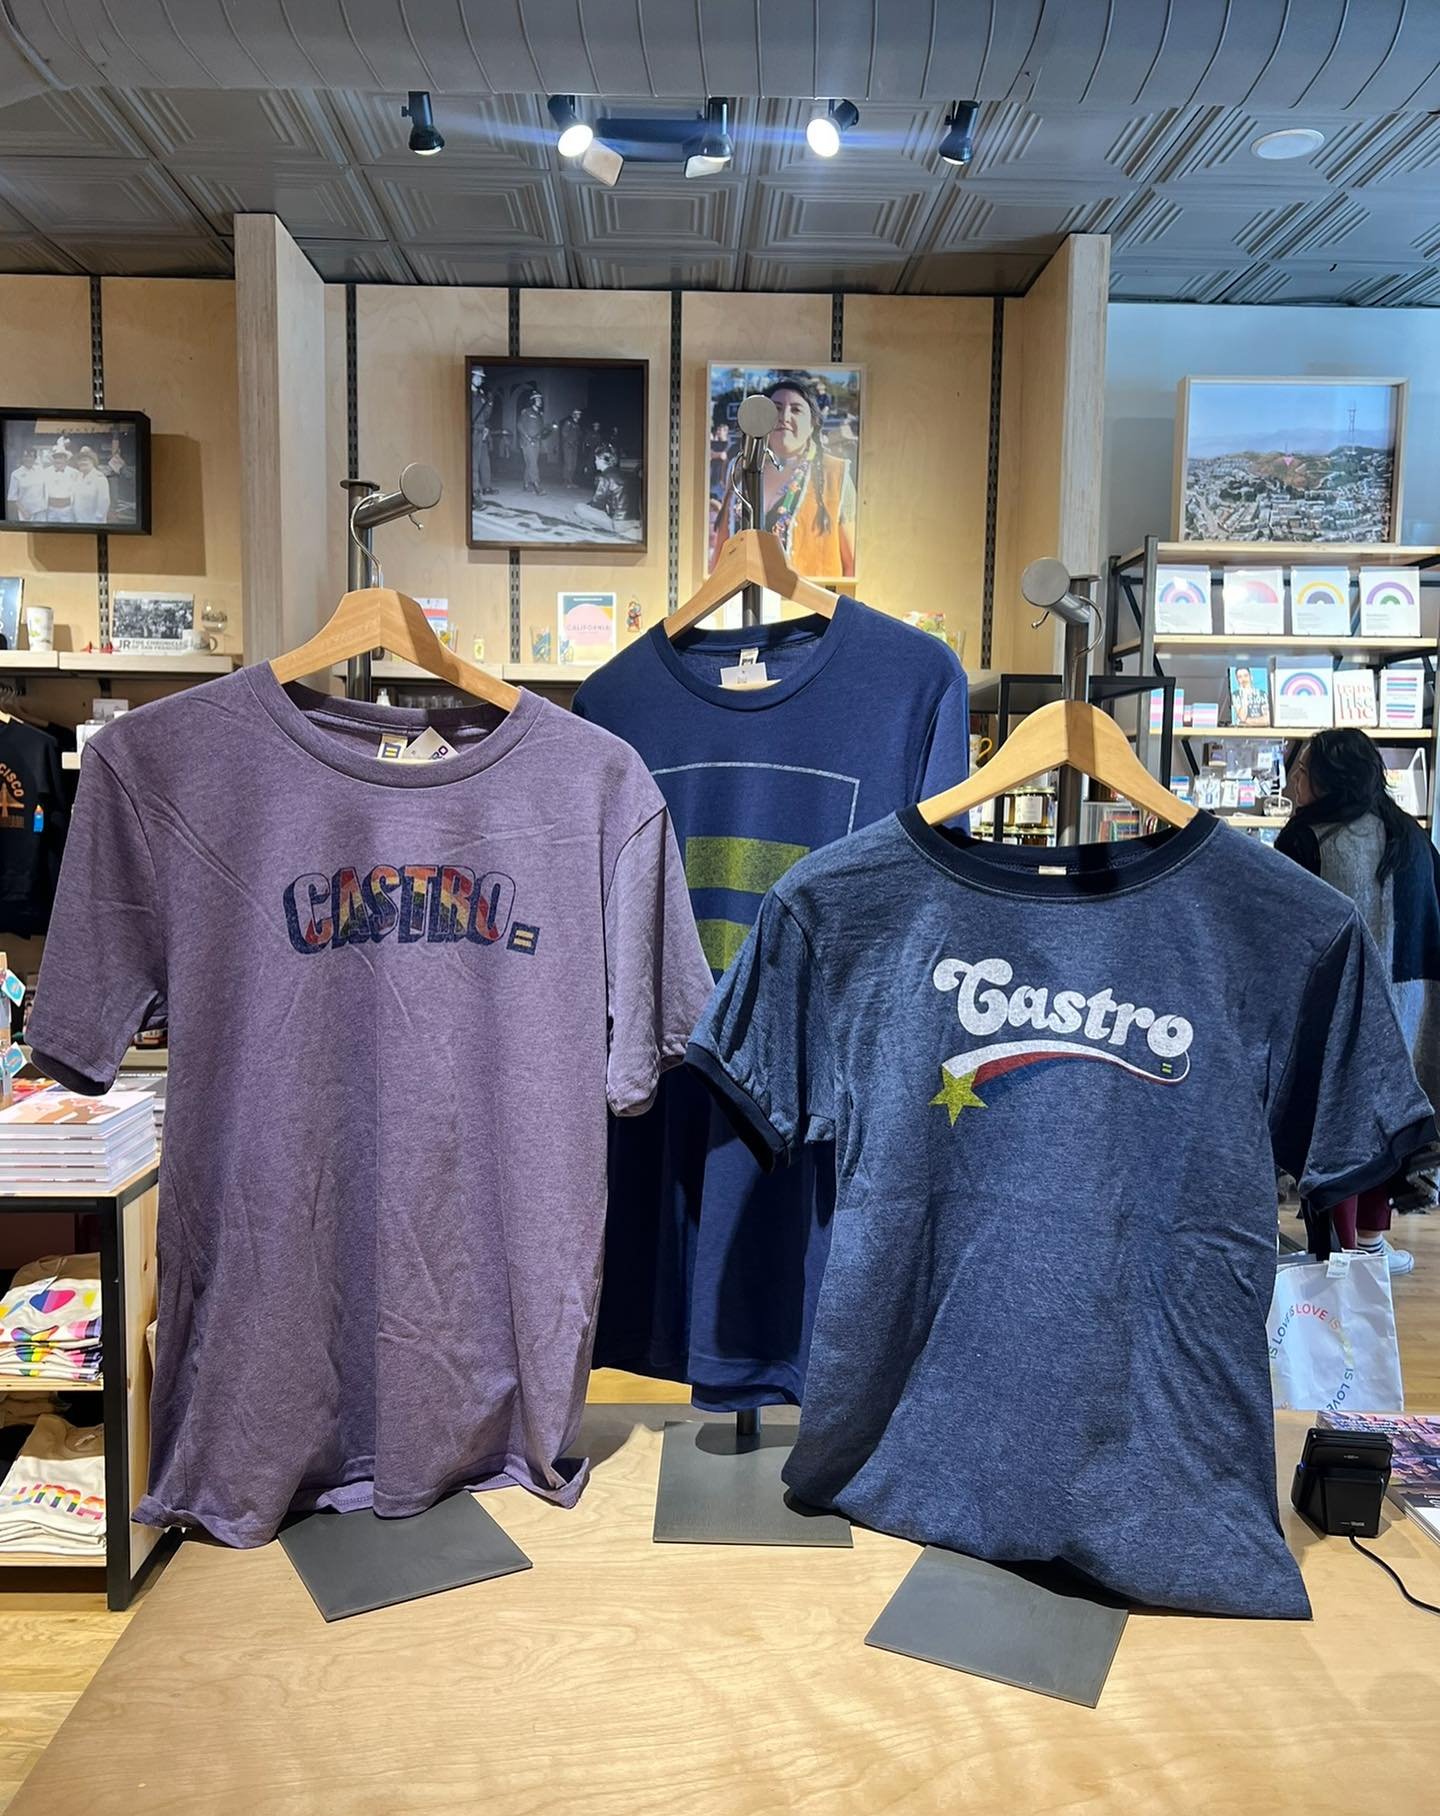 @hrcsf is back in the Castro!! We are so honored to be partnering with HRC and sharing our space with them! Come by and get your shirts today!